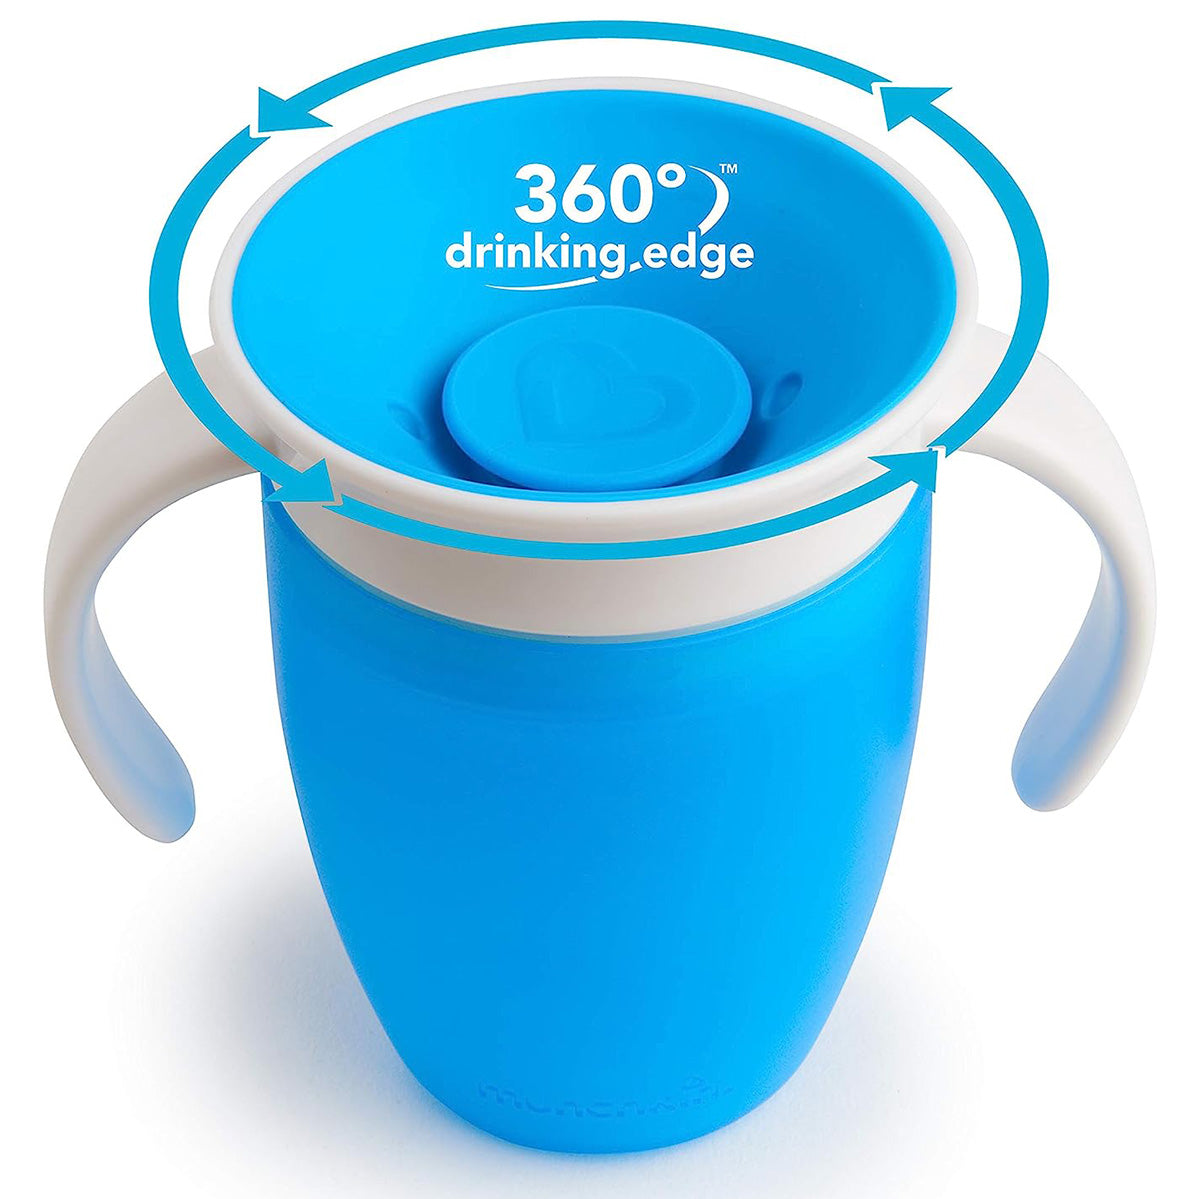 Munchkin - Miracle 360 Trainer Cup with Lid 7oz (Blue)